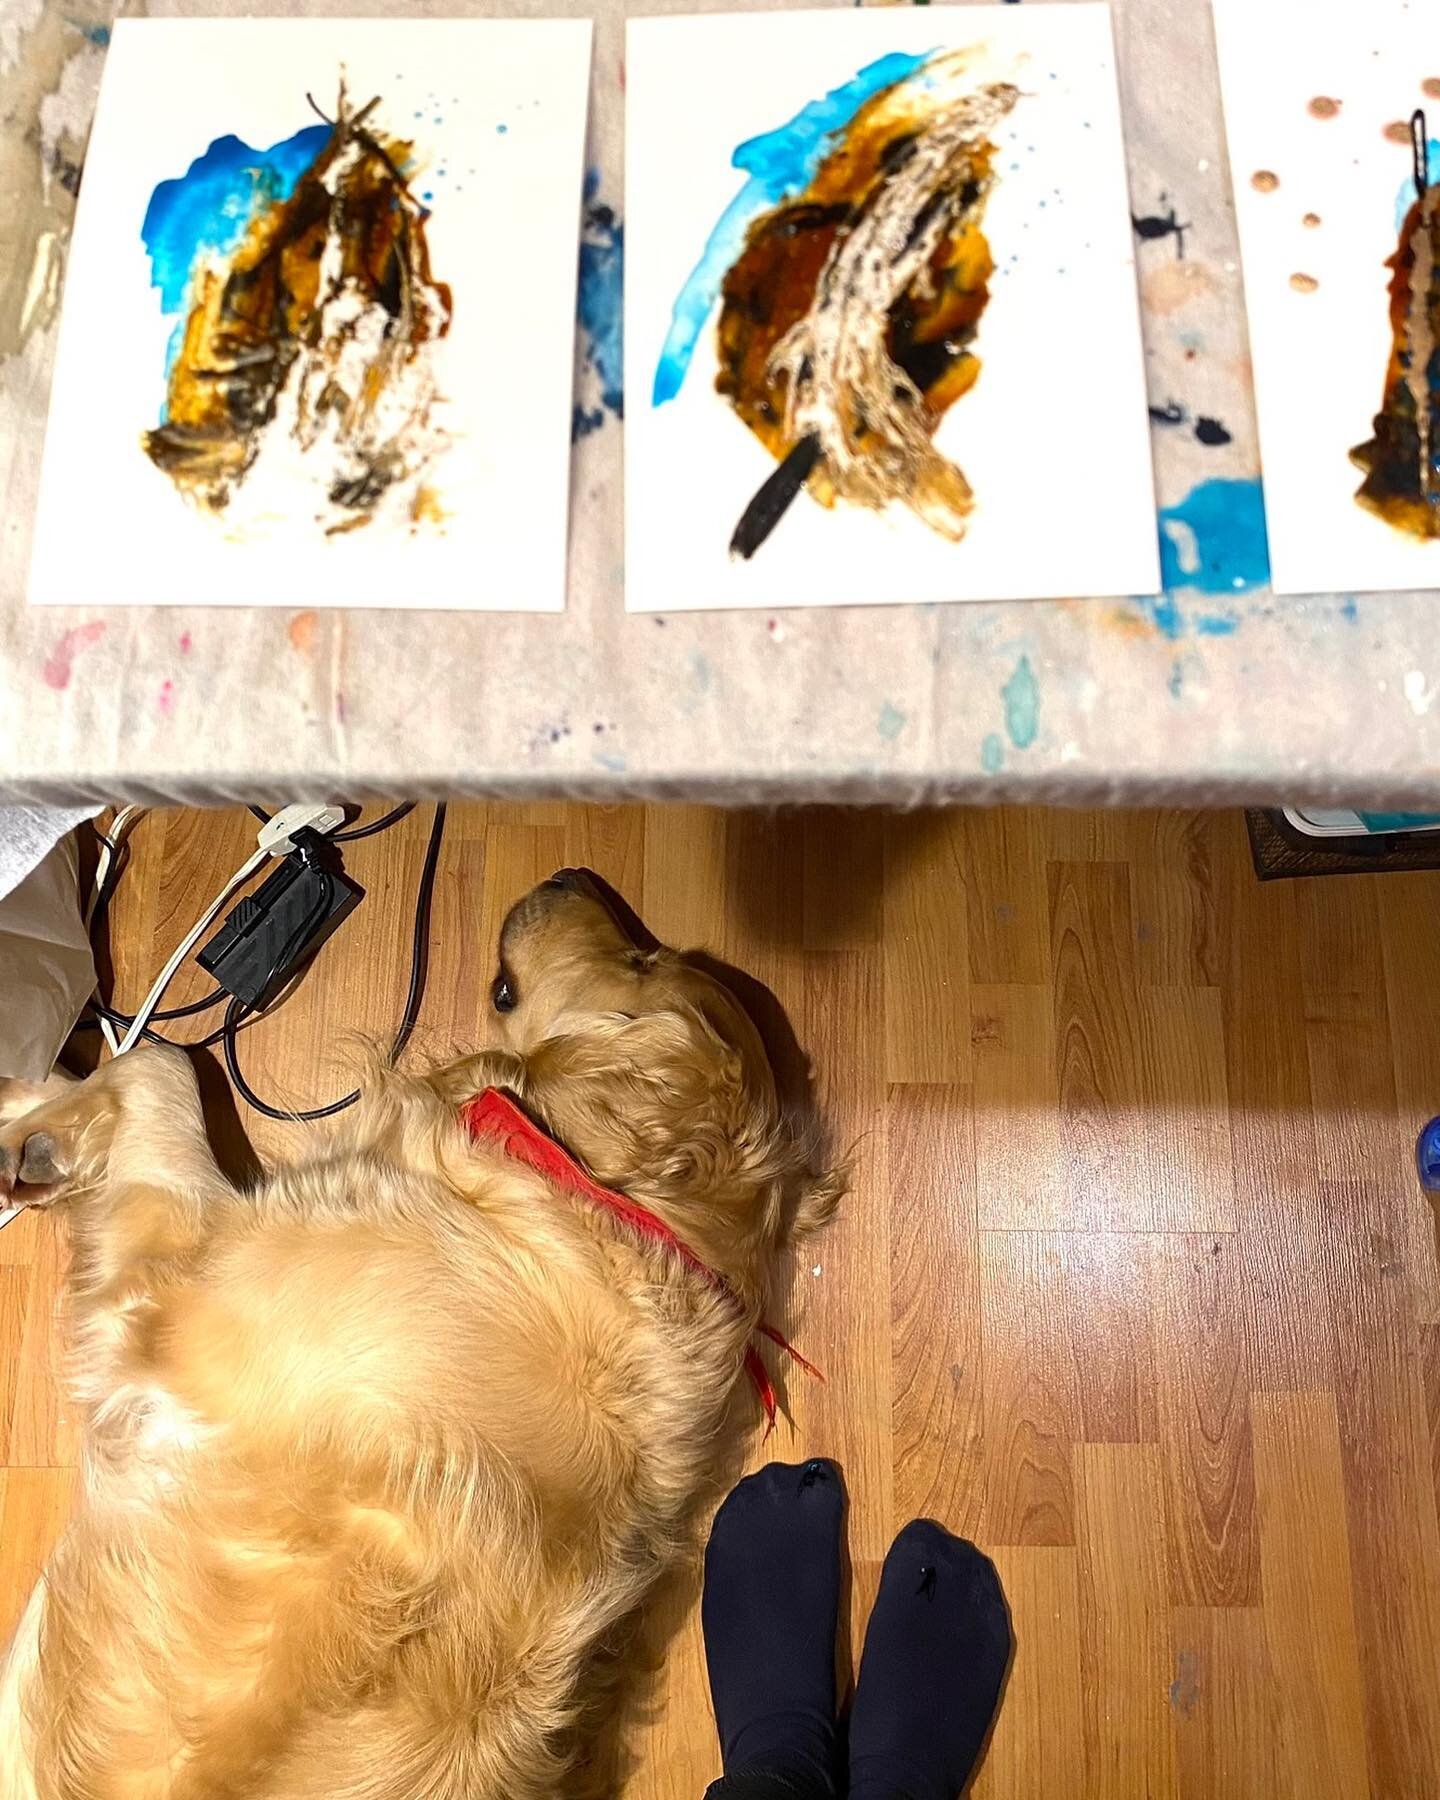 I am always moved to see my dog by my feet while I create. It's amazing how he understands the importance of art to me. Even though I have a bit less space, I enjoy him staying there, supporting me in silence. Thank you my friend for your uncondition